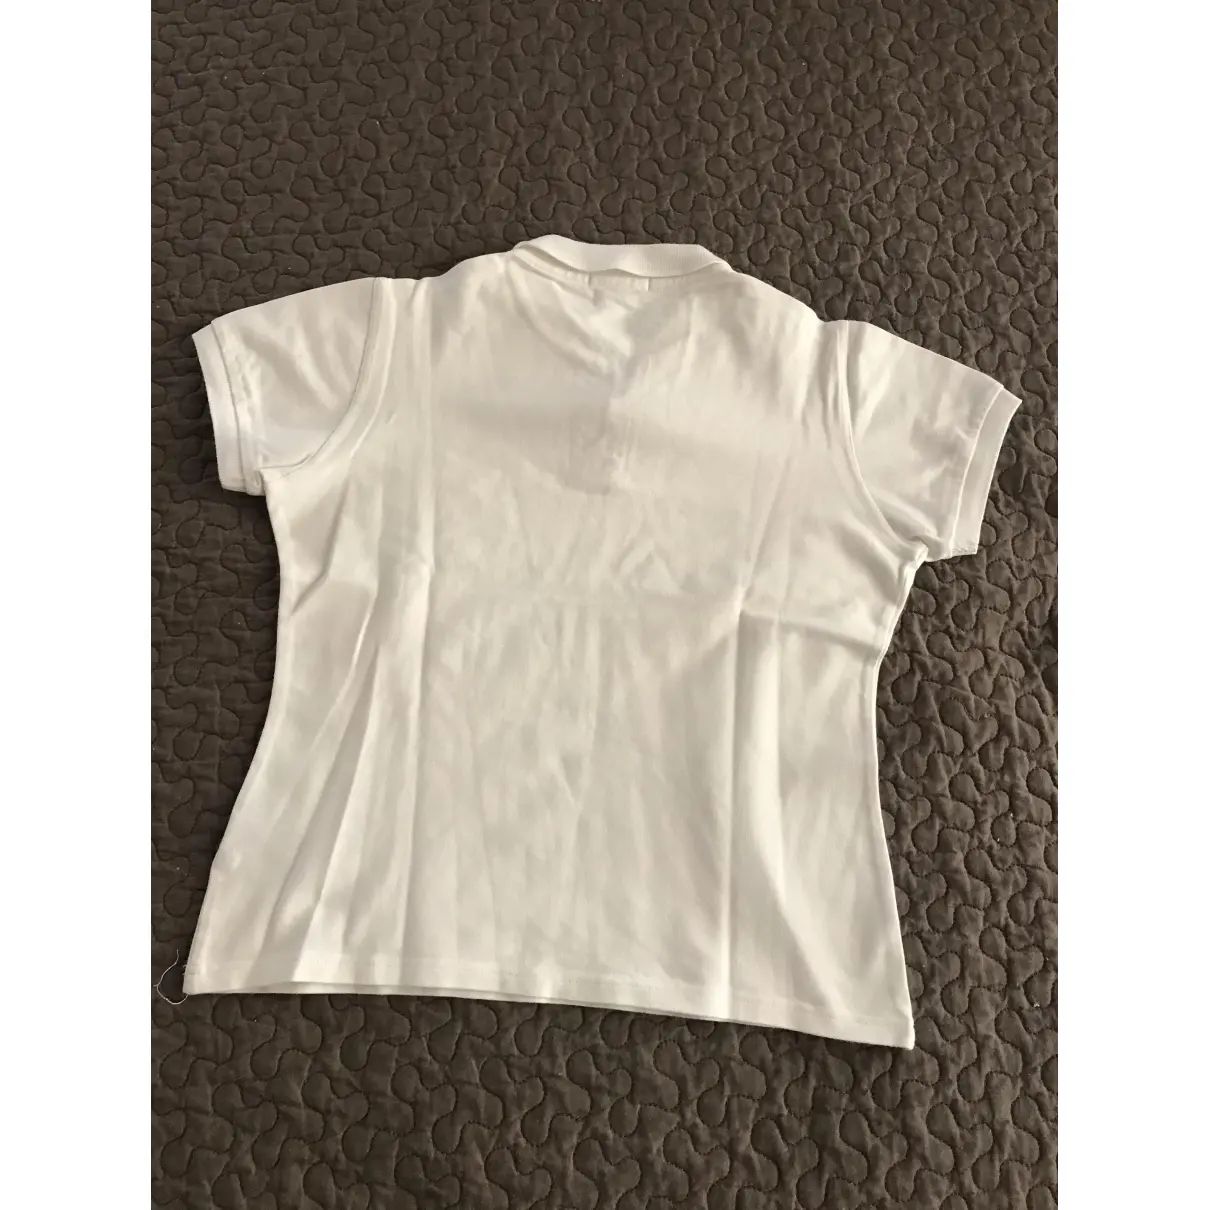 Buy Burberry Polo online - Vintage